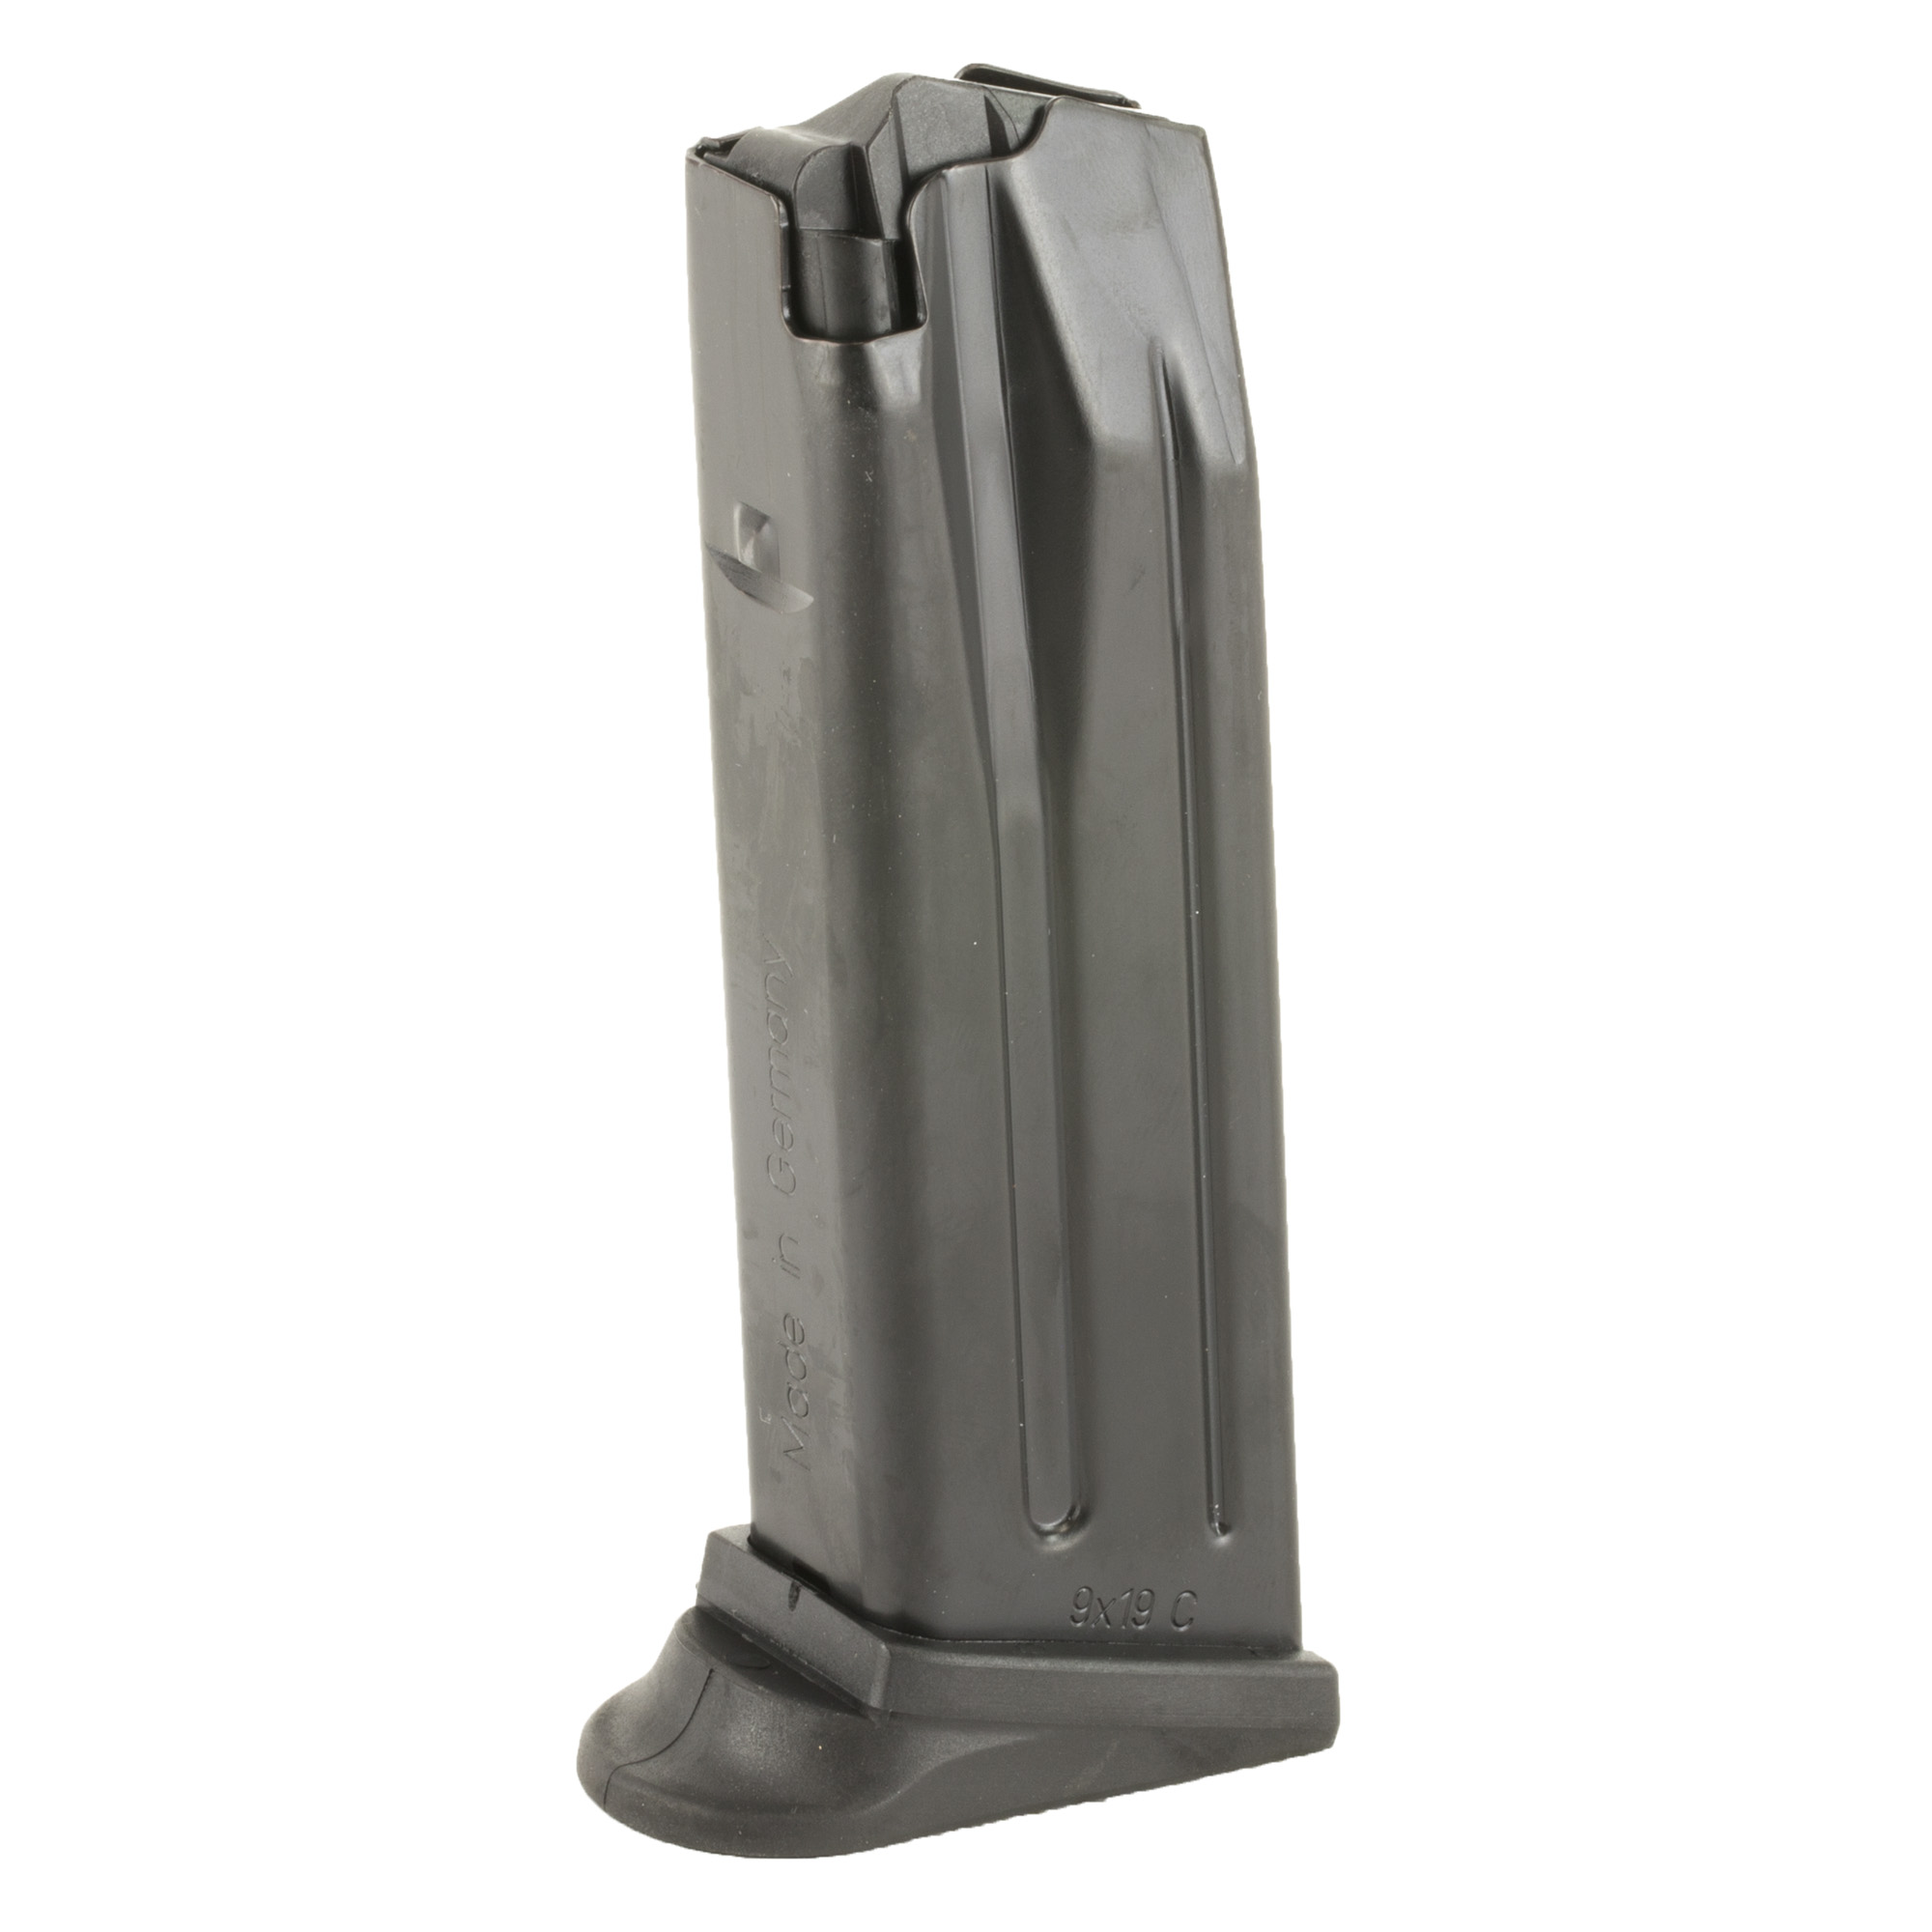 Heckler & Koch USP Compact/P2000 9mm Magazine 13 Rounds Blued Steel (215979S) 642230247277